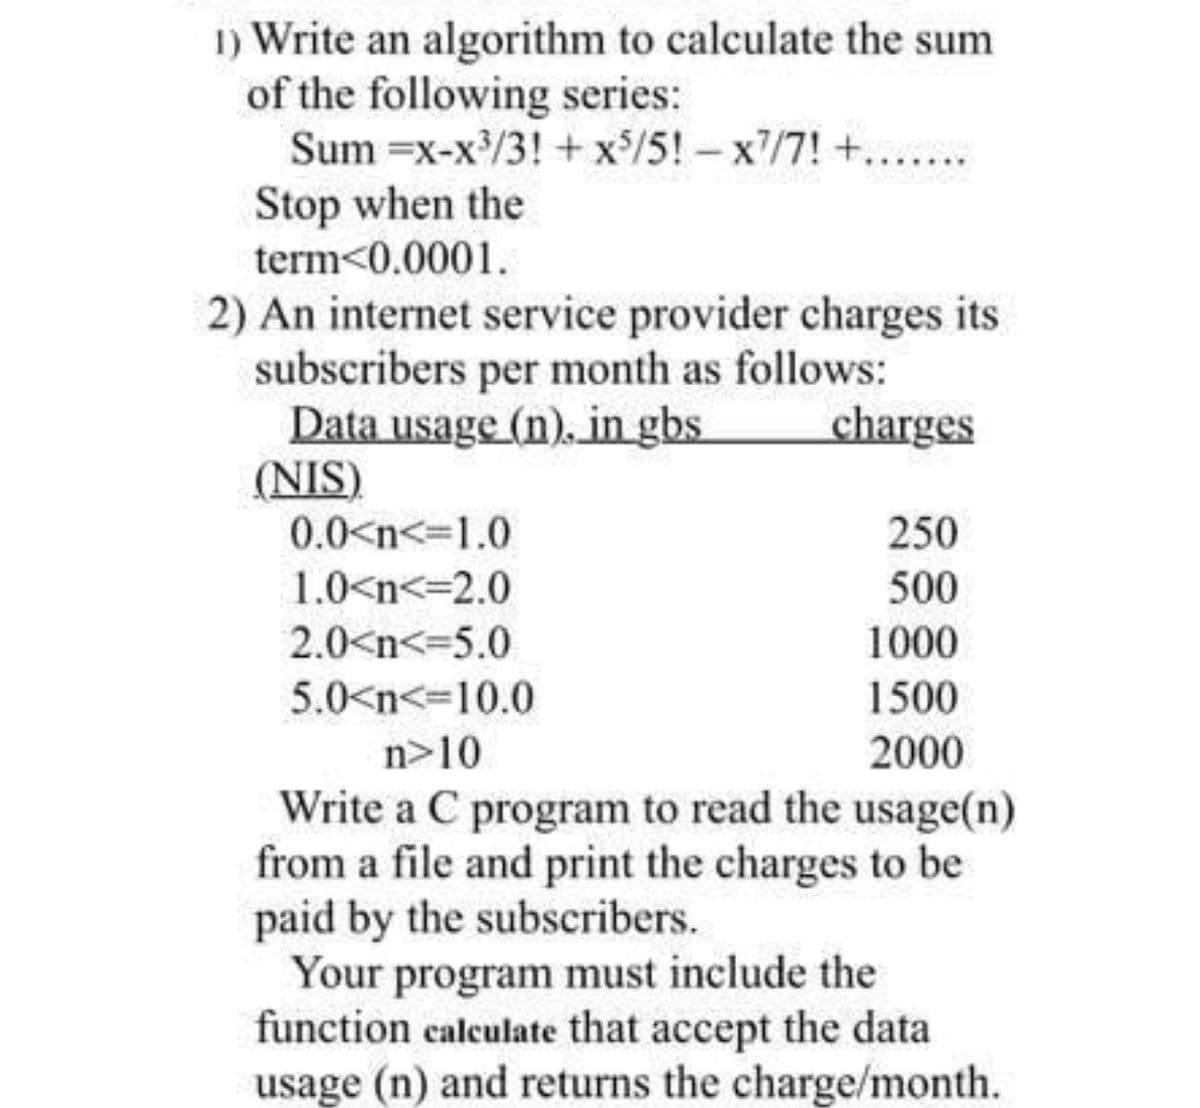 1) Write an algorithm to calculate the sum
of the following series:
Sum =x-x/3! +x/5! – x/7! +.....
Stop when the
term<0.0001.
2) An internet service provider charges its
subscribers per month as follows:
Data usage (n). in gbs
(NIS)
0.0<n<=1.0
charges
250
1.0<n<=2.0
500
2.0<n<=5.0
1000
5.0<n<=10.0
1500
n>10
2000
Write a C program to read the usage(n)
from a file and print the charges to be
paid by the subscribers.
Your program must include the
function calculate that accept the data
usage (n) and returns the charge/month.
